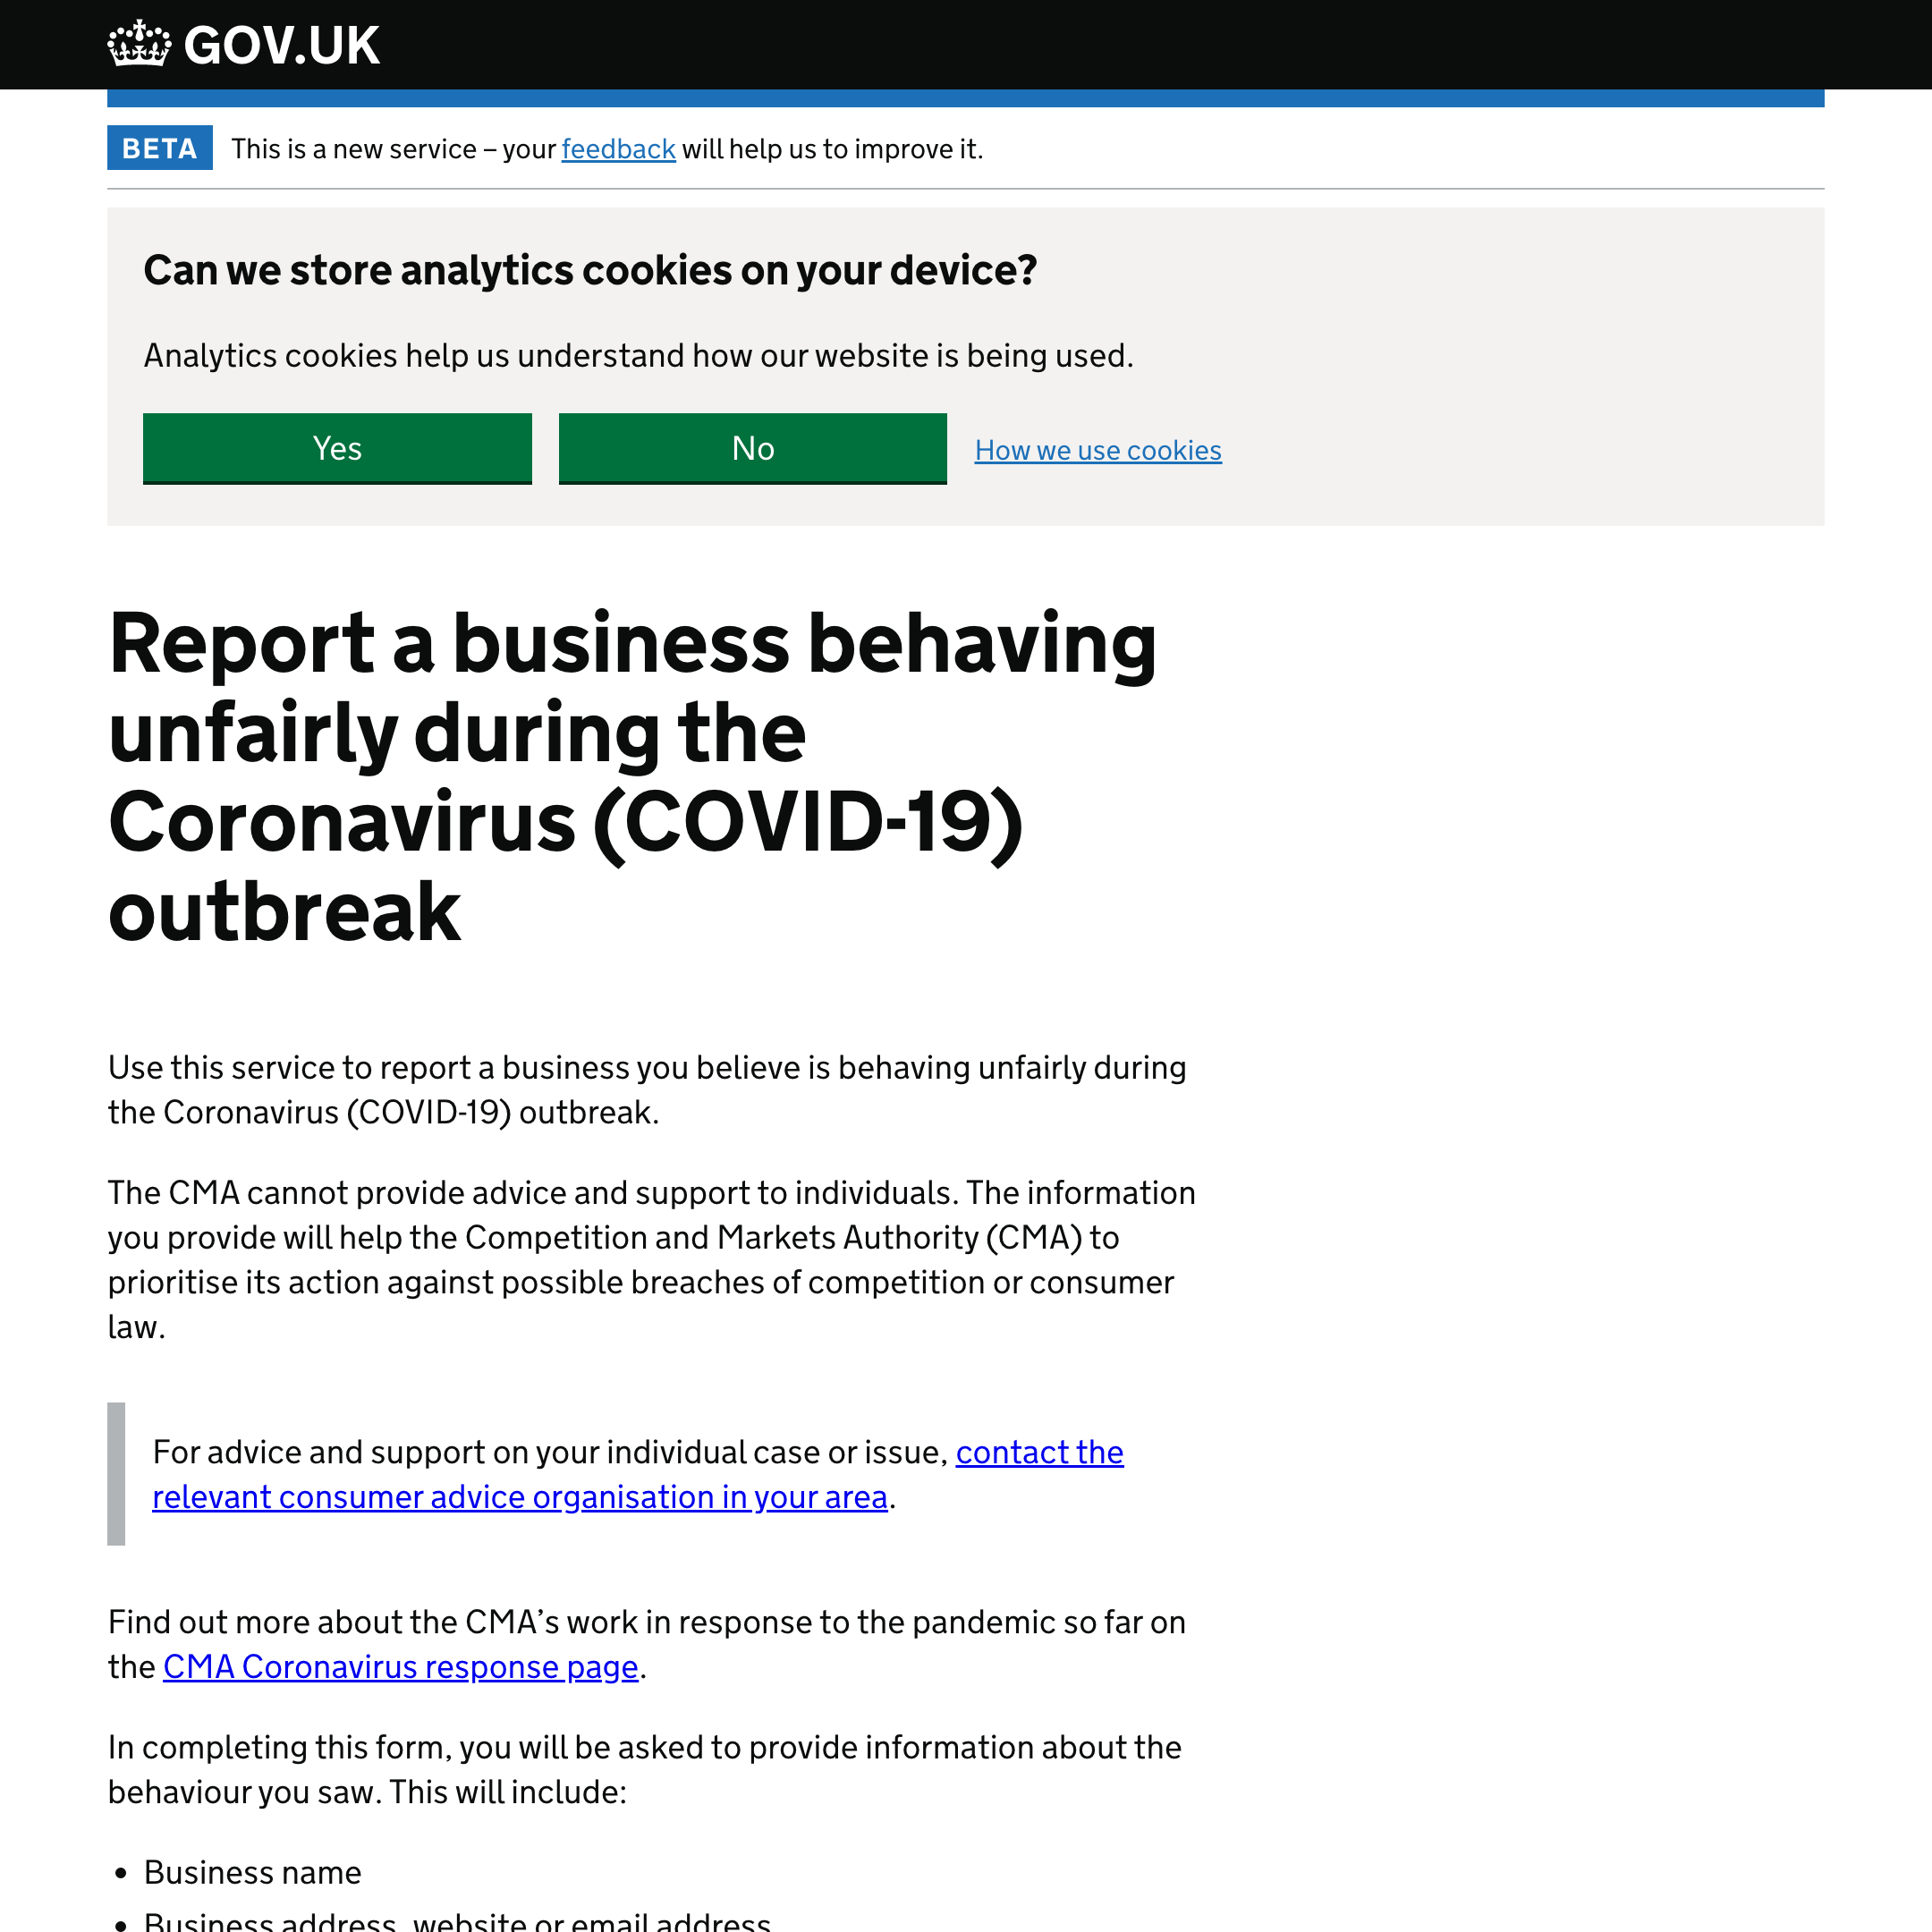 Report a business behaving unfairly during the Coronavirus (COVID-19) outbreak